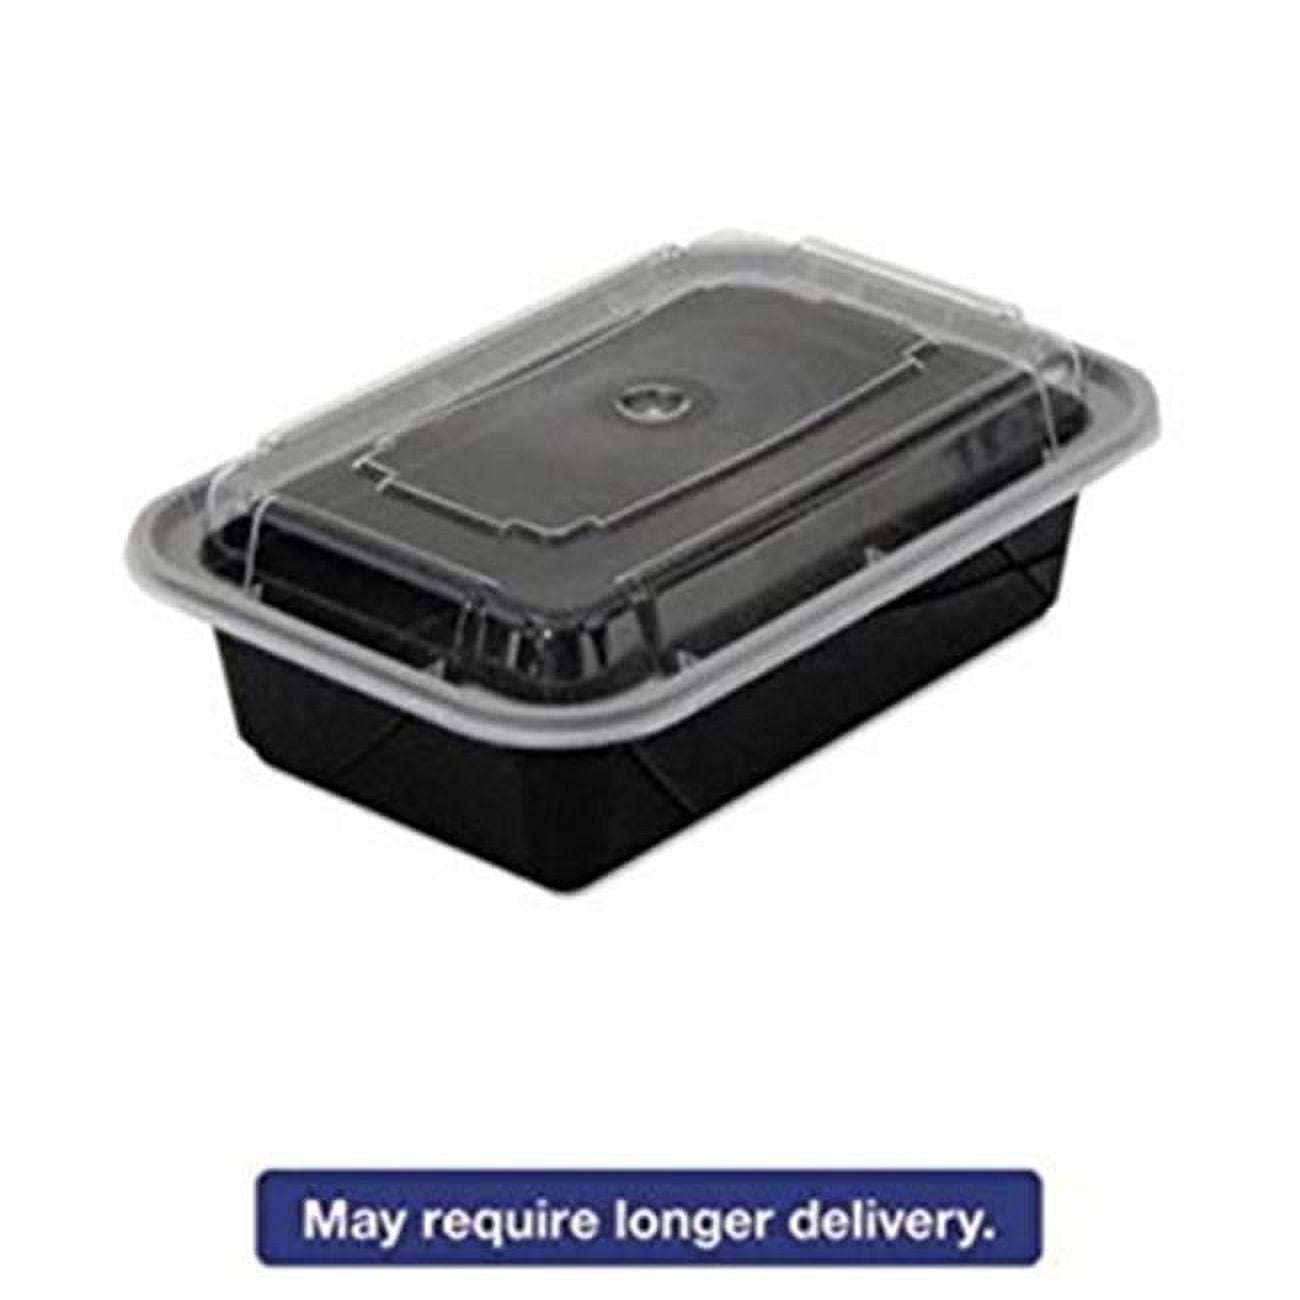 Roku Black Plastic Short Take Out Sushi Container - with Clear Lid - 7 1/2  x 4 3/4 x 2 - 100 count box